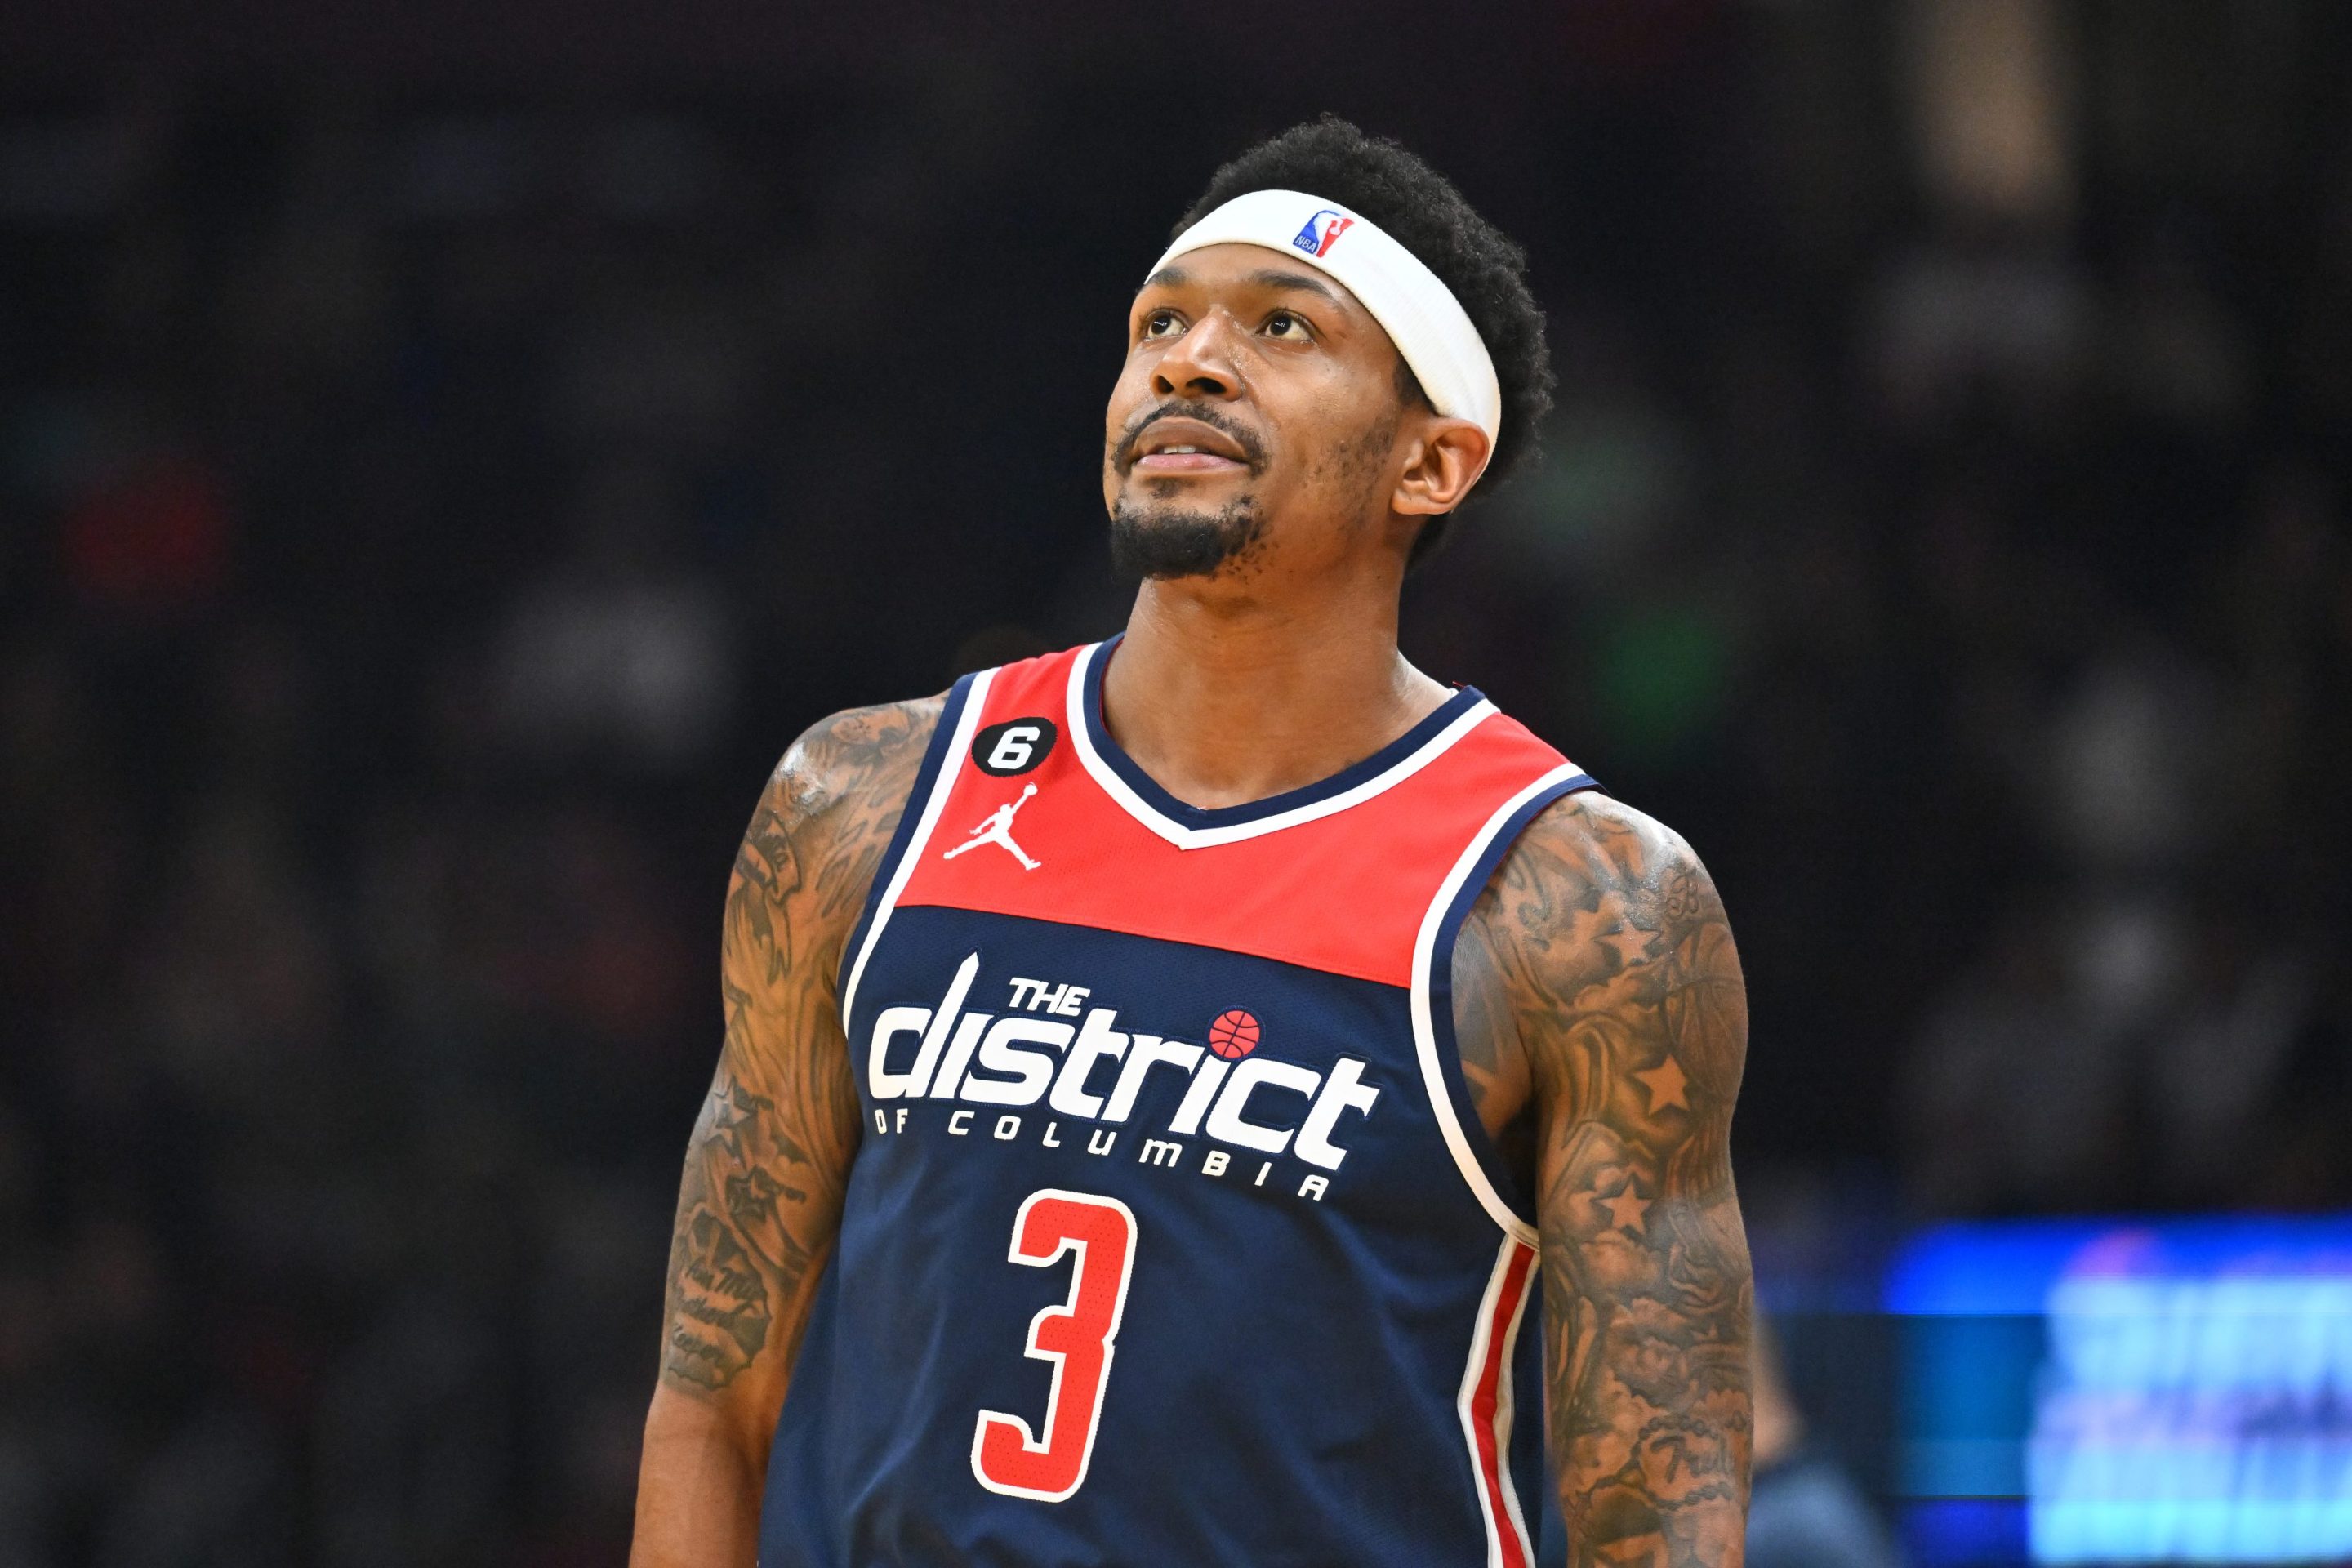 Bradley Beal #3 of the Washington Wizards watches during the second quarter against the Cleveland Cavaliers at Rocket Mortgage Fieldhouse on March 17, 2023.